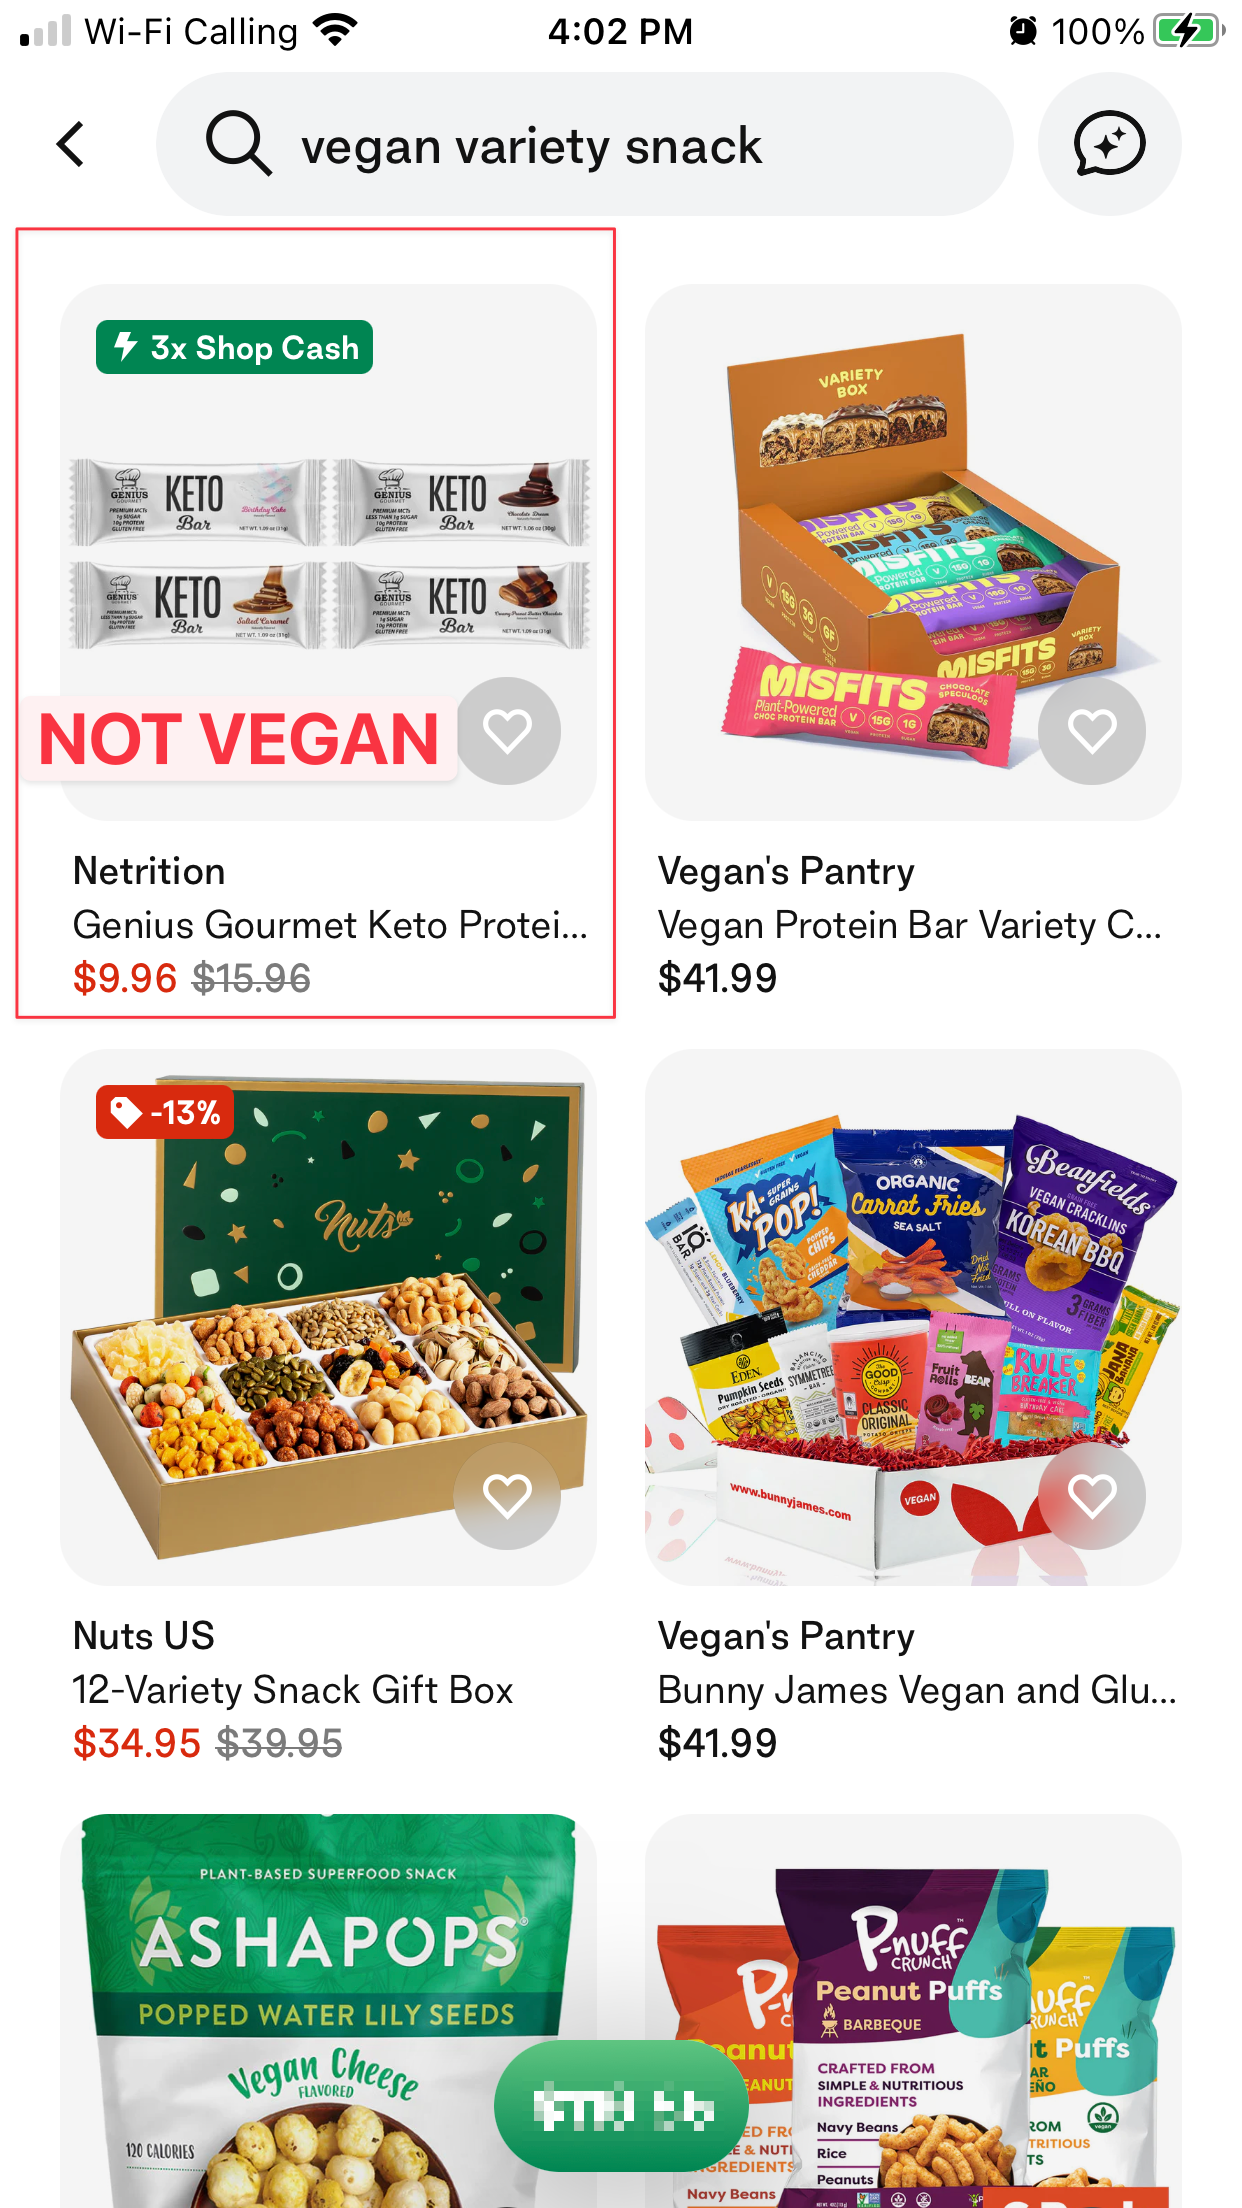 Shop App search result for vegan variety snack. Top left result is a keto bar that is not vegan.